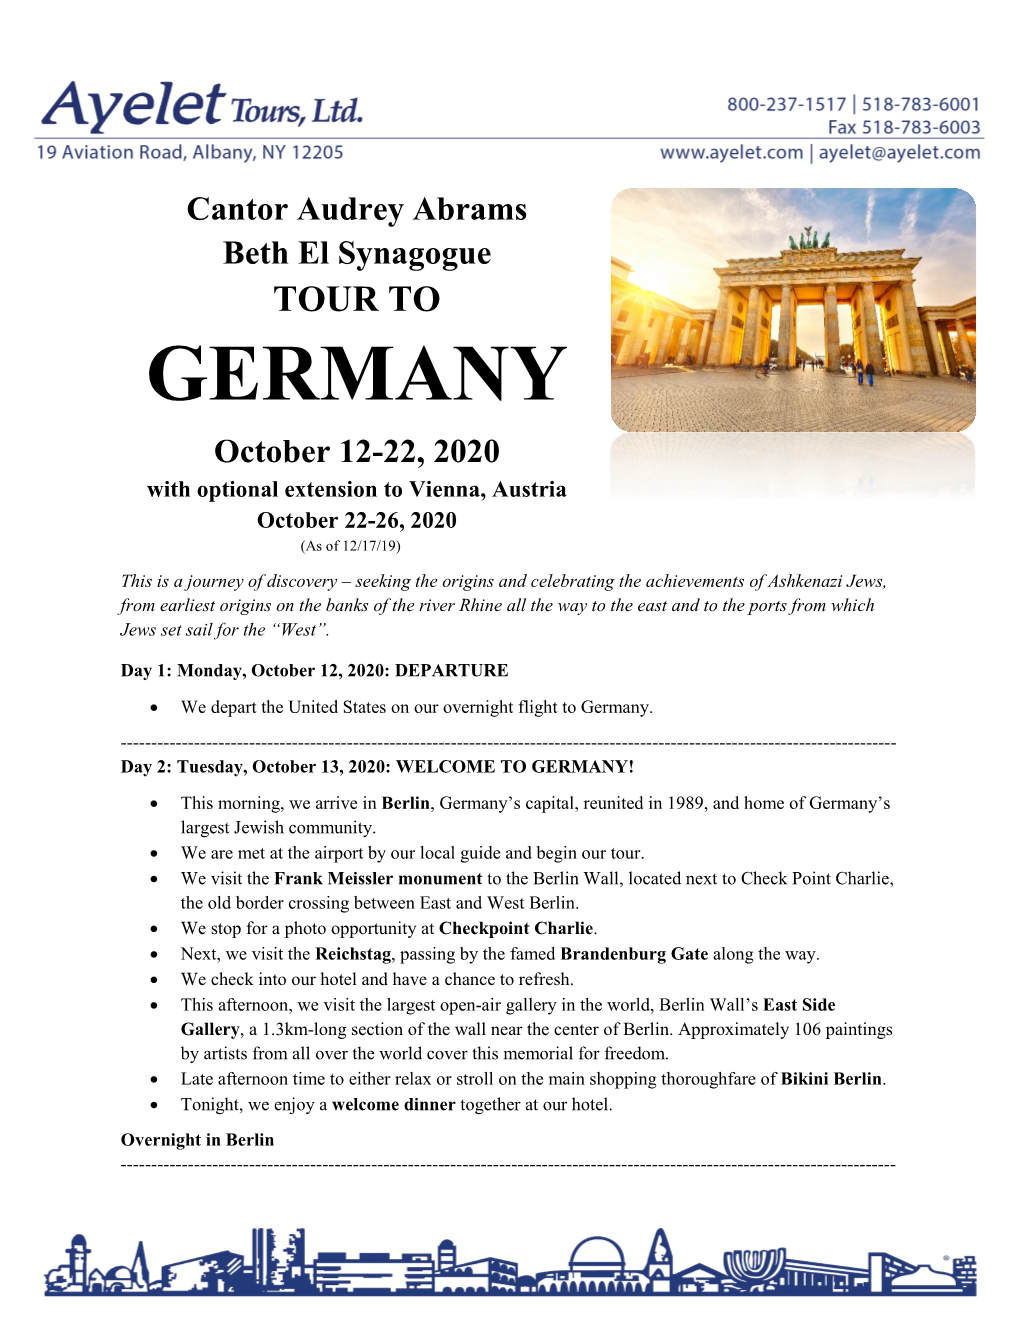 GERMANY October 12-22, 2020 with Optional Extension to Vienna, Austria October 22-26, 2020 (As of 12/17/19)